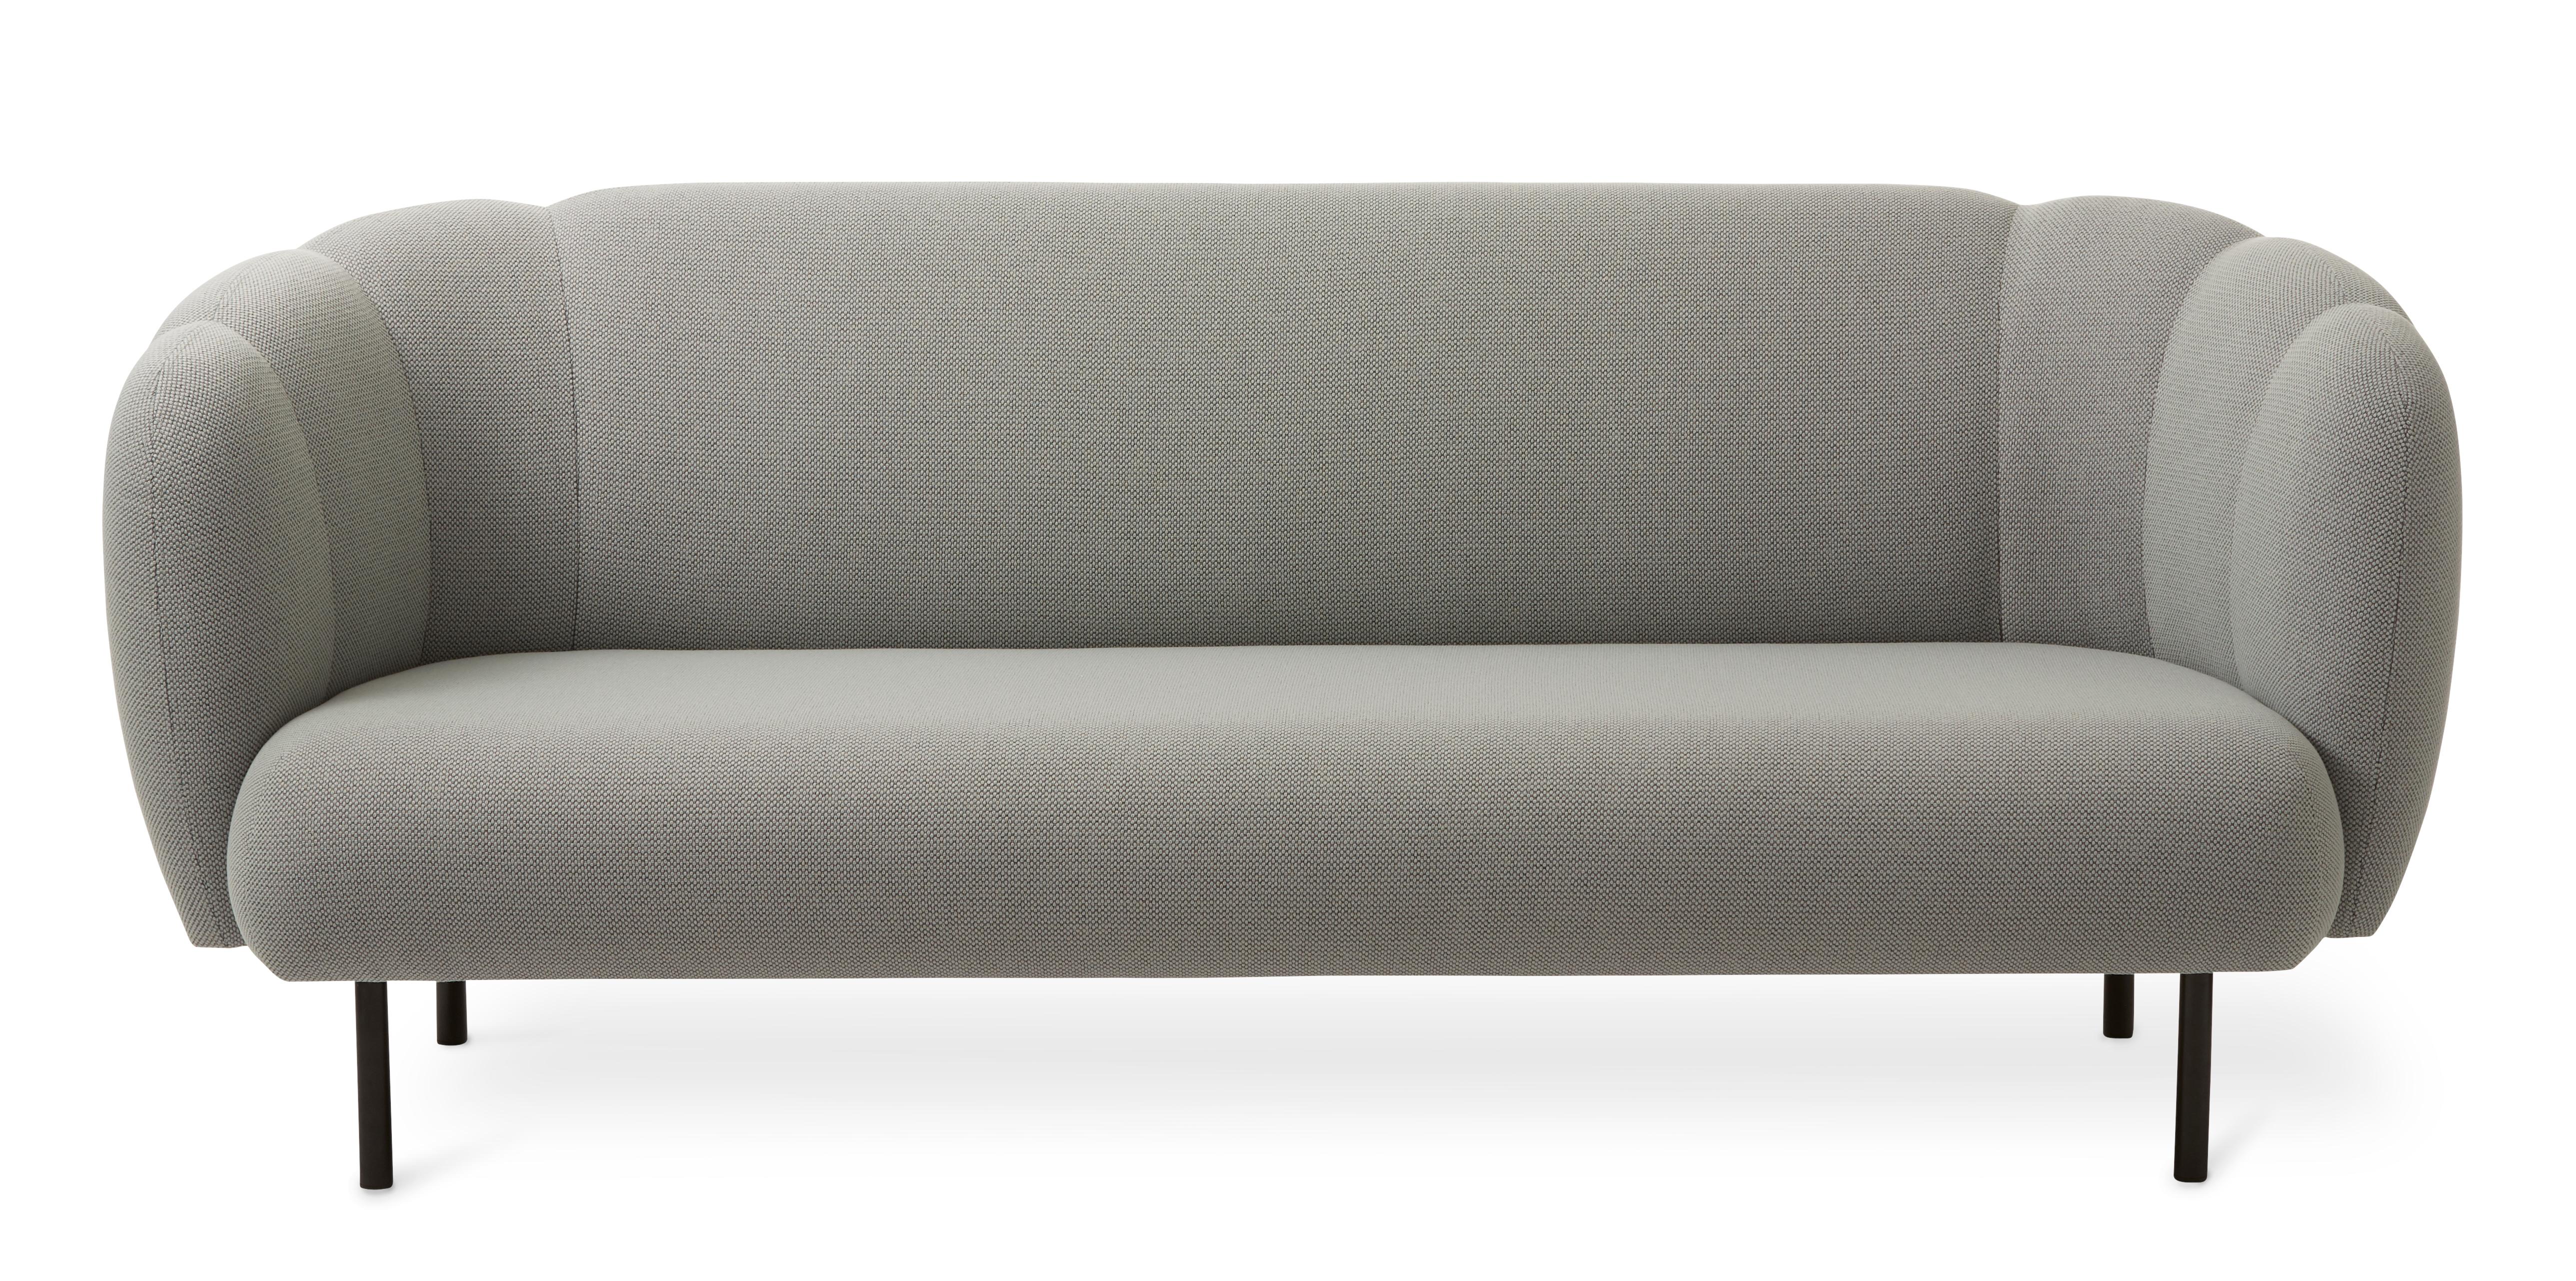 For Sale: Gray (Merit 016) Cape 3-Seat Stitch Sofa, by Charlotte Høncke from Warm Nordic